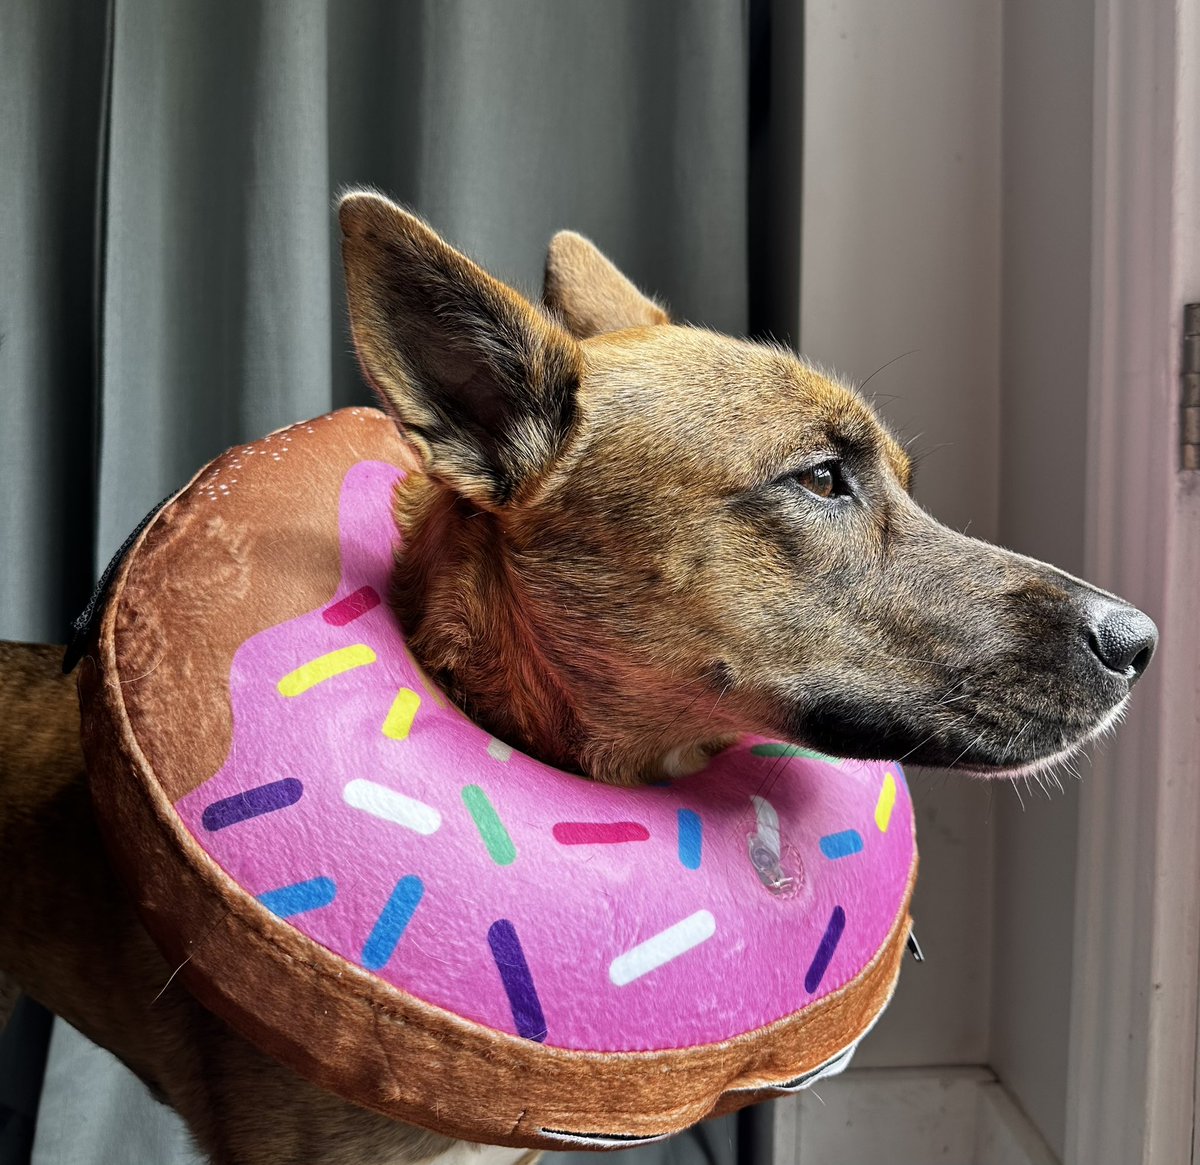 Eevee got her new post-surgery donut yesterday. She likes it much better than the cone. 🐕🍩